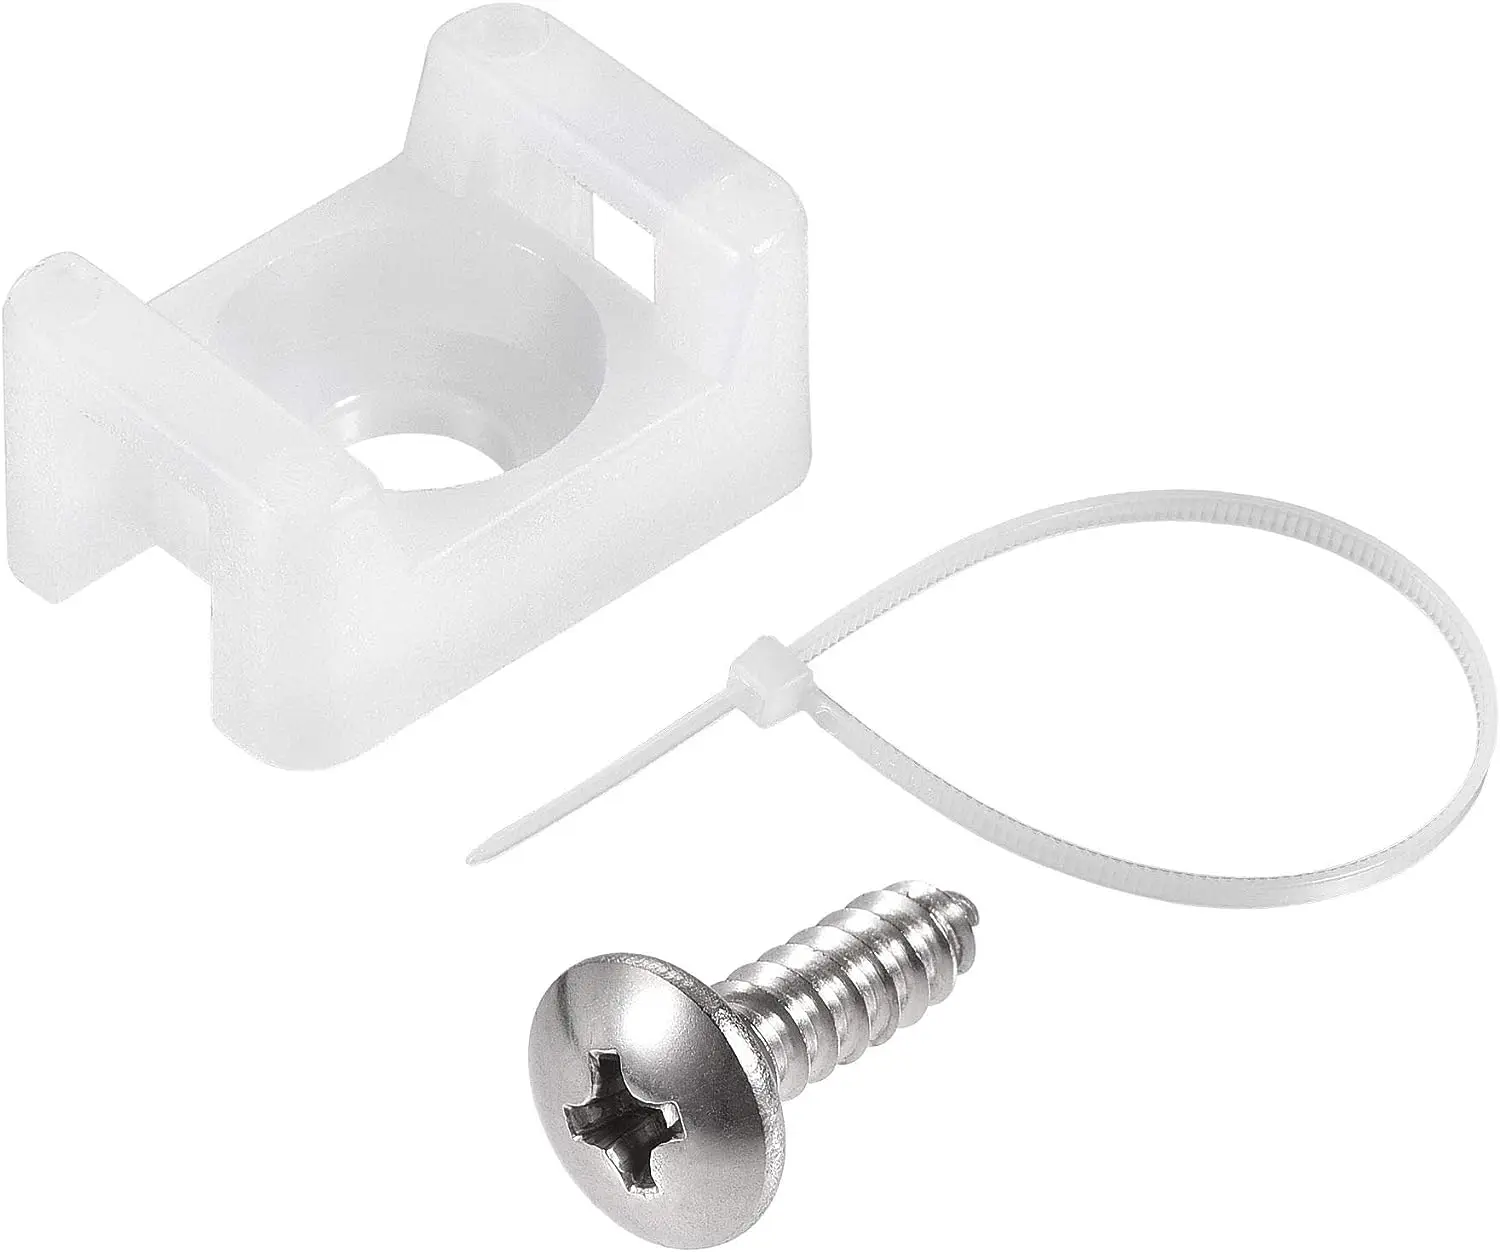 

Tcenofoxy 14.6mm x 10mm x 6.85mm Nylon Cable Fasten Clip with Screws and Ties White 50 Set